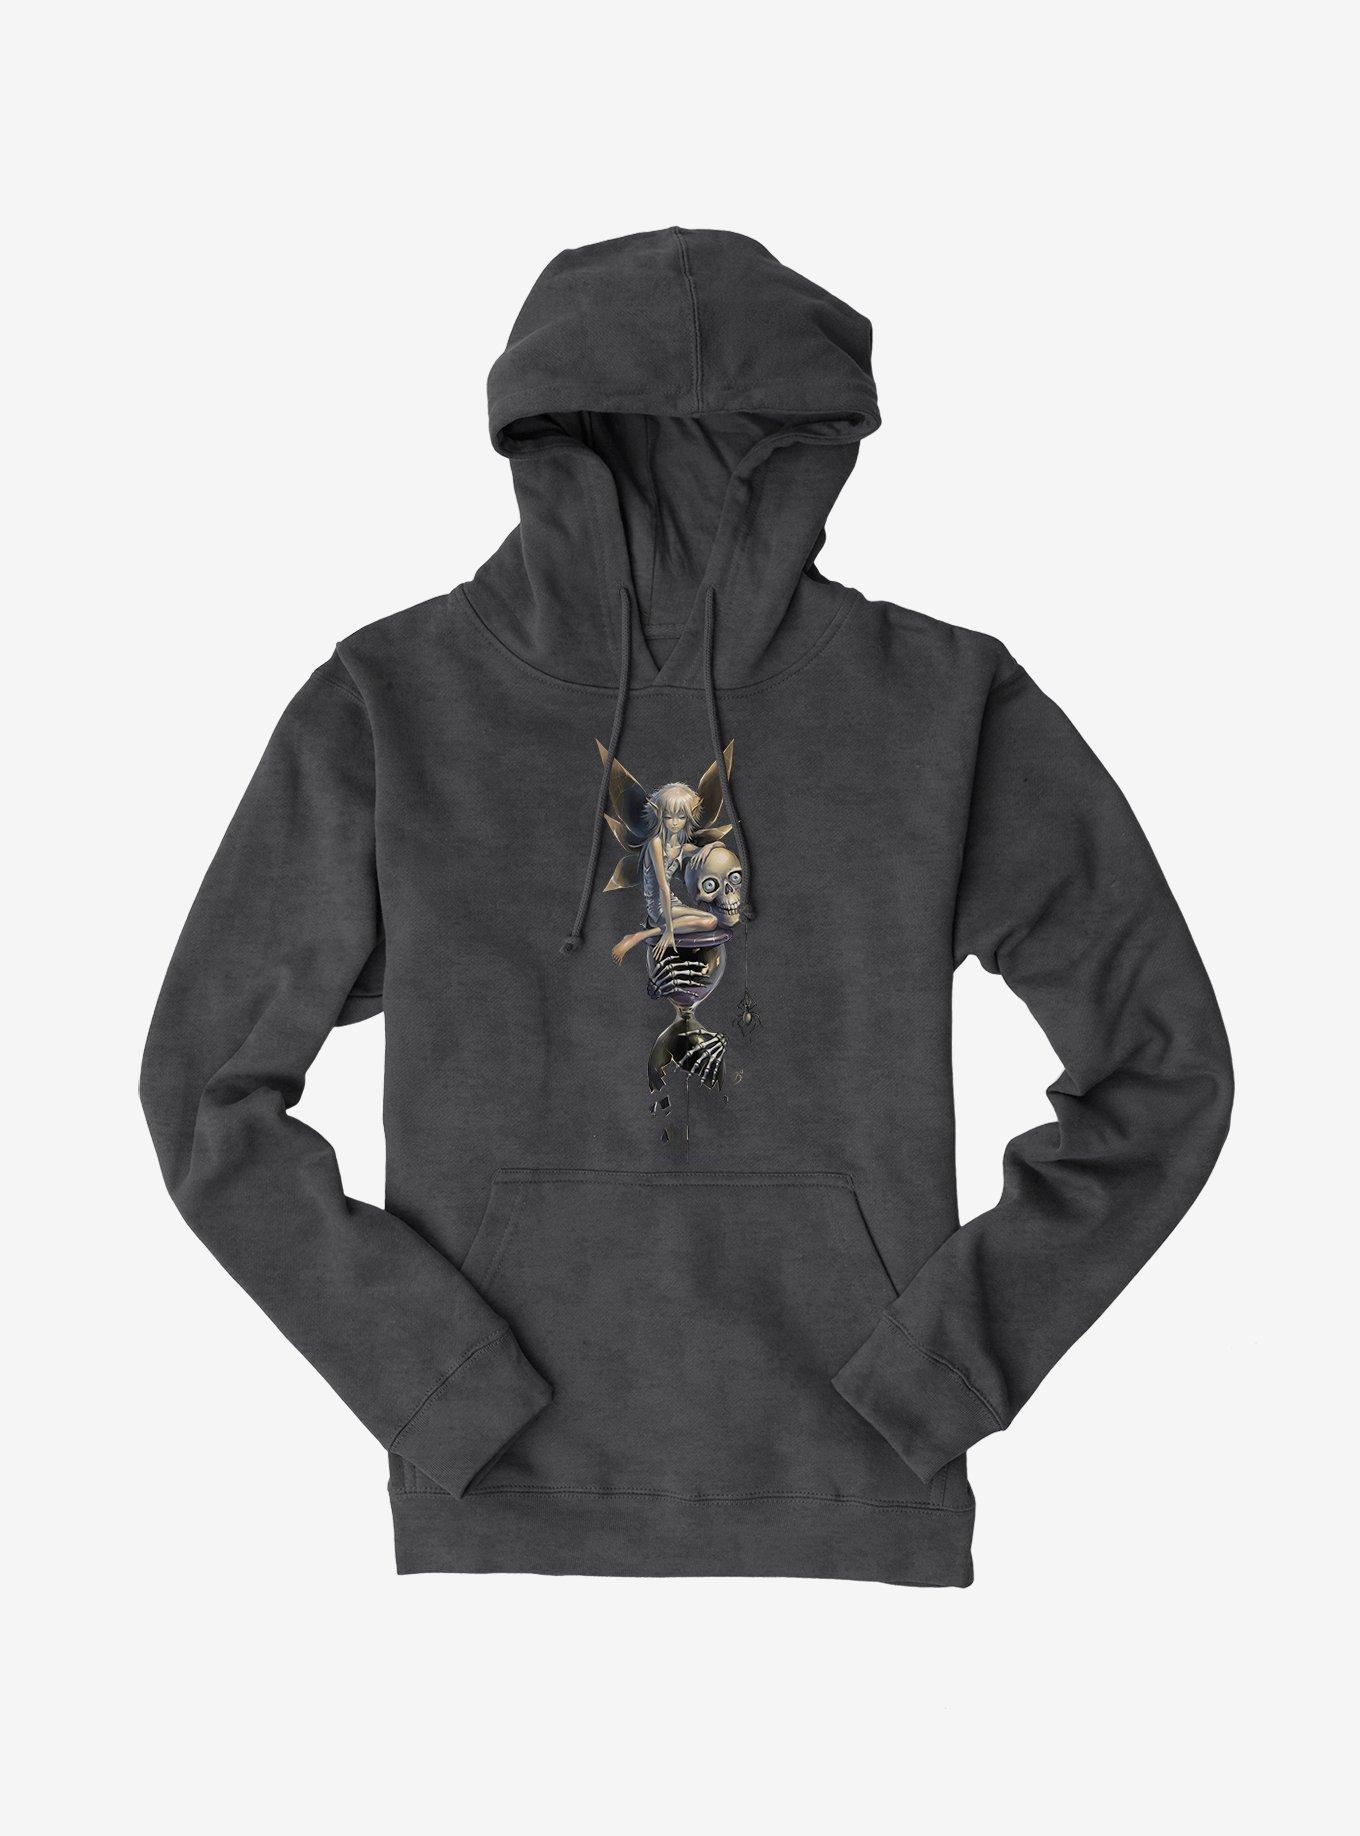 Fairies By Trick Skull Fairy Hoodie, CHARCOAL HEATHER, hi-res